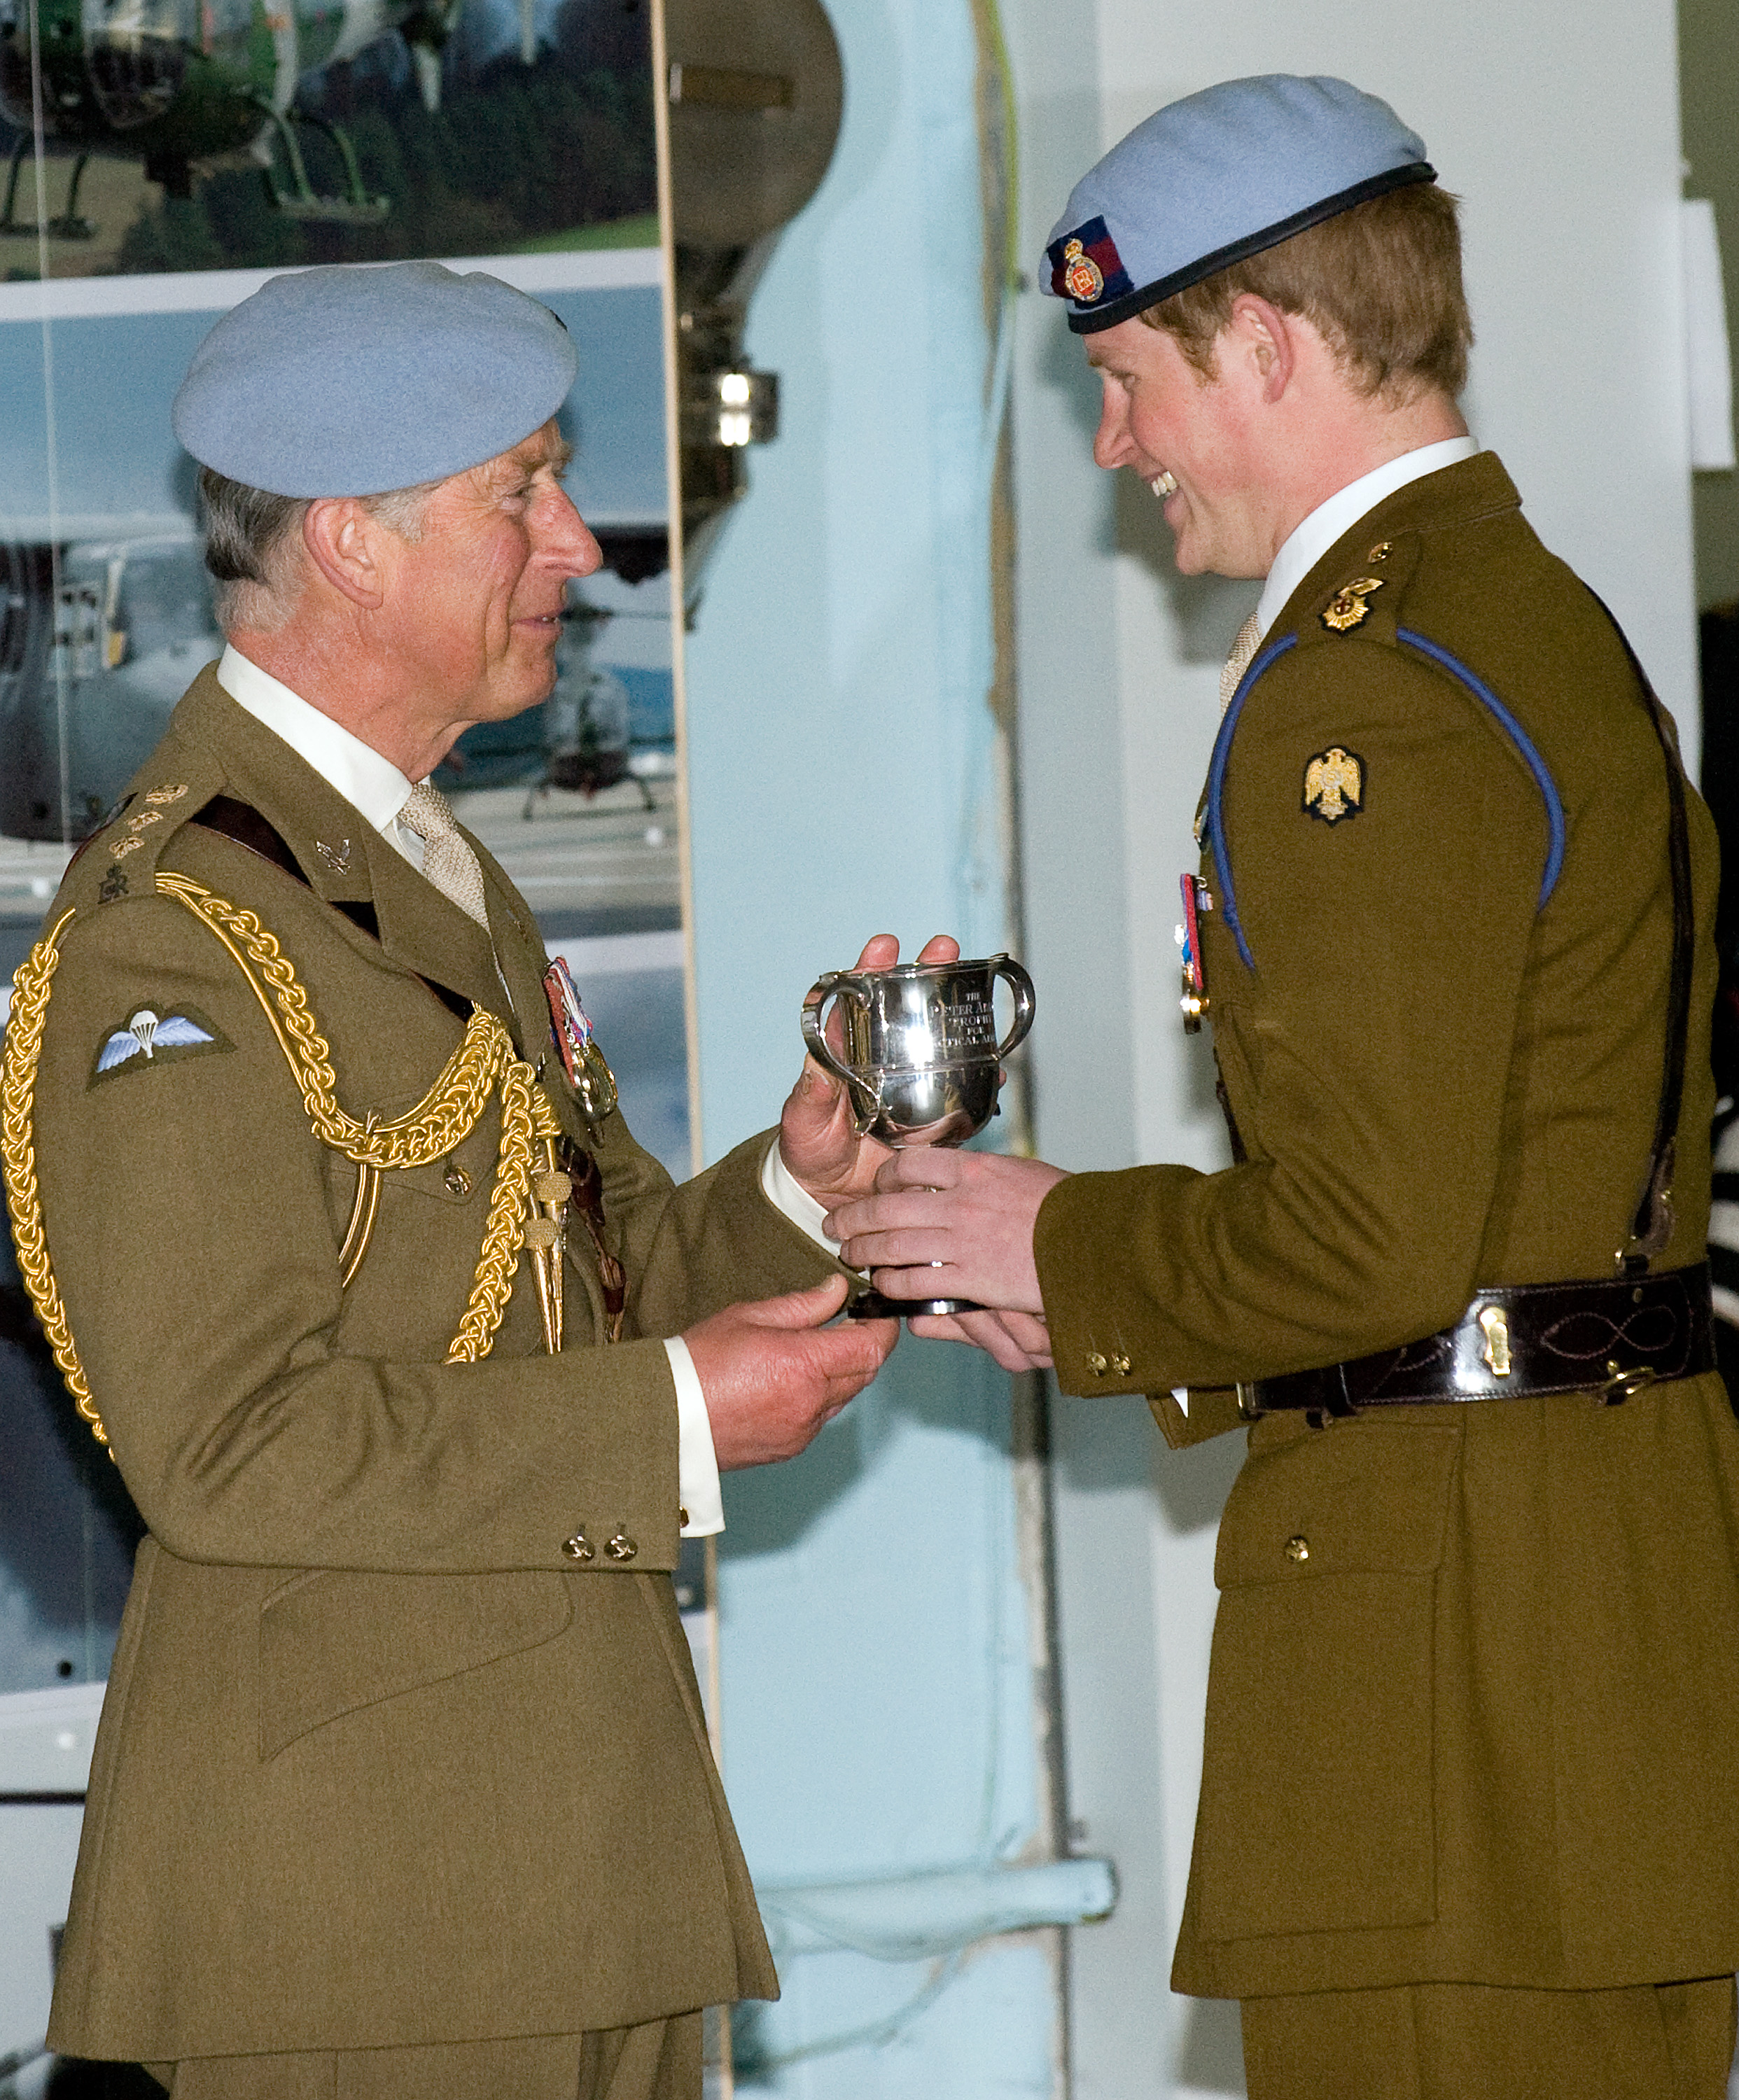 Prince Charles, Prince of Wales presents Prince Harry with his flying badges in Middle Wallup, England on May 7, 2010. | Source: Getty Images